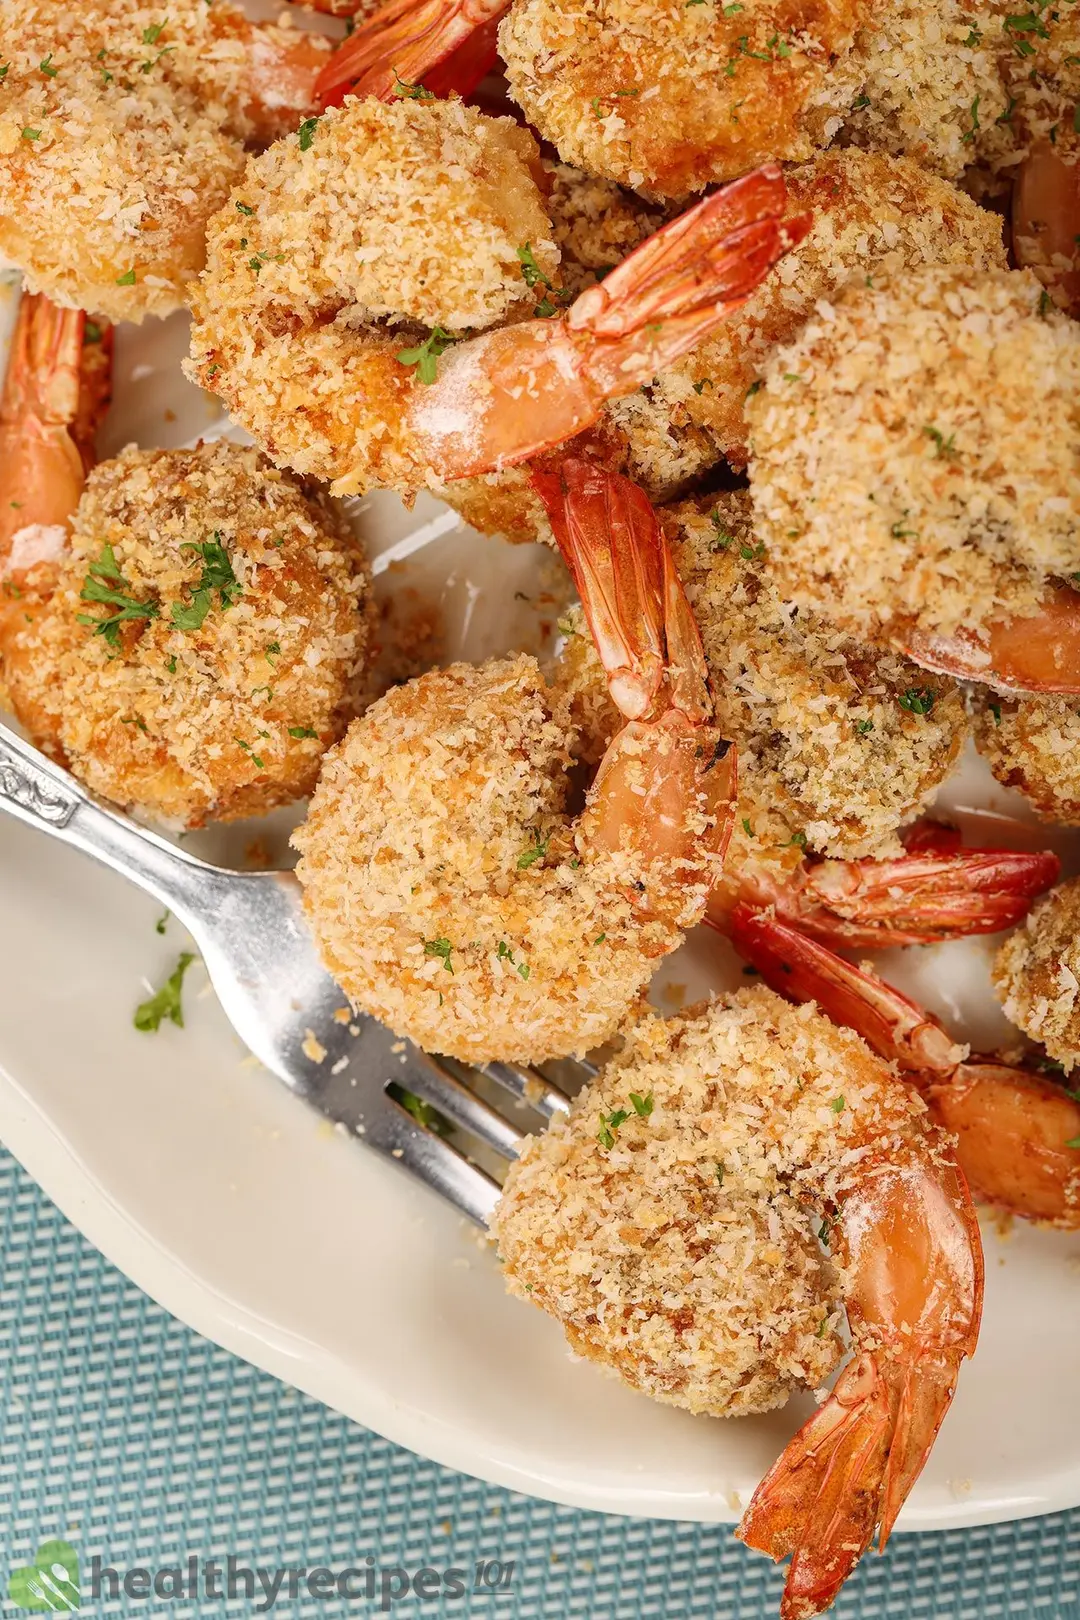 How to Store and Reheat Coconut Shrimp